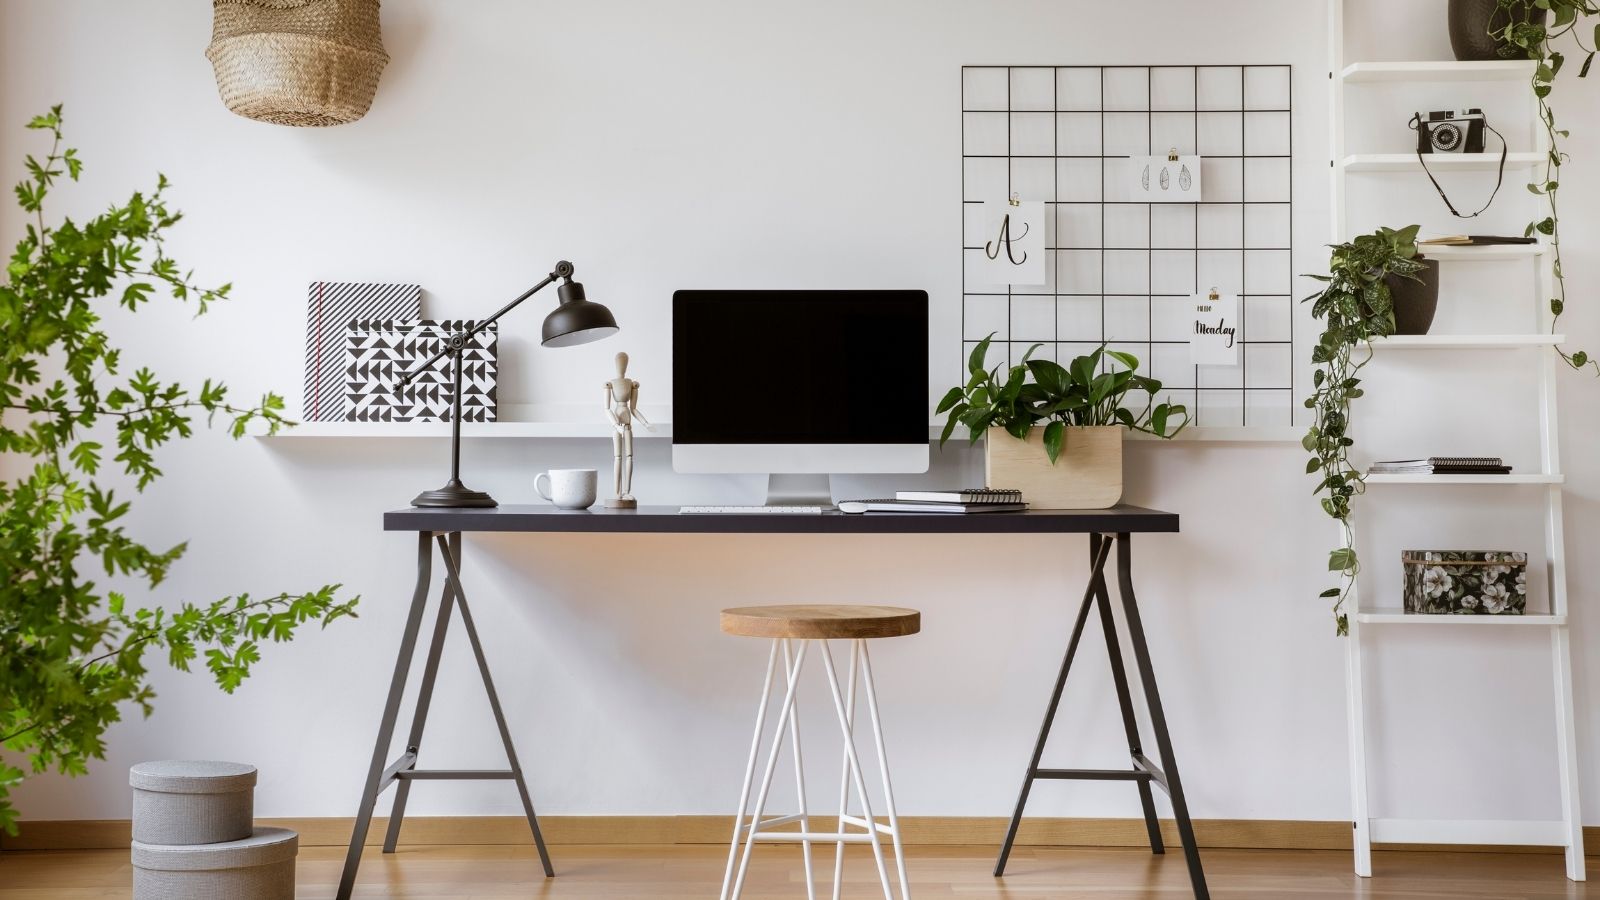 Things You Must Have in Your Home Office